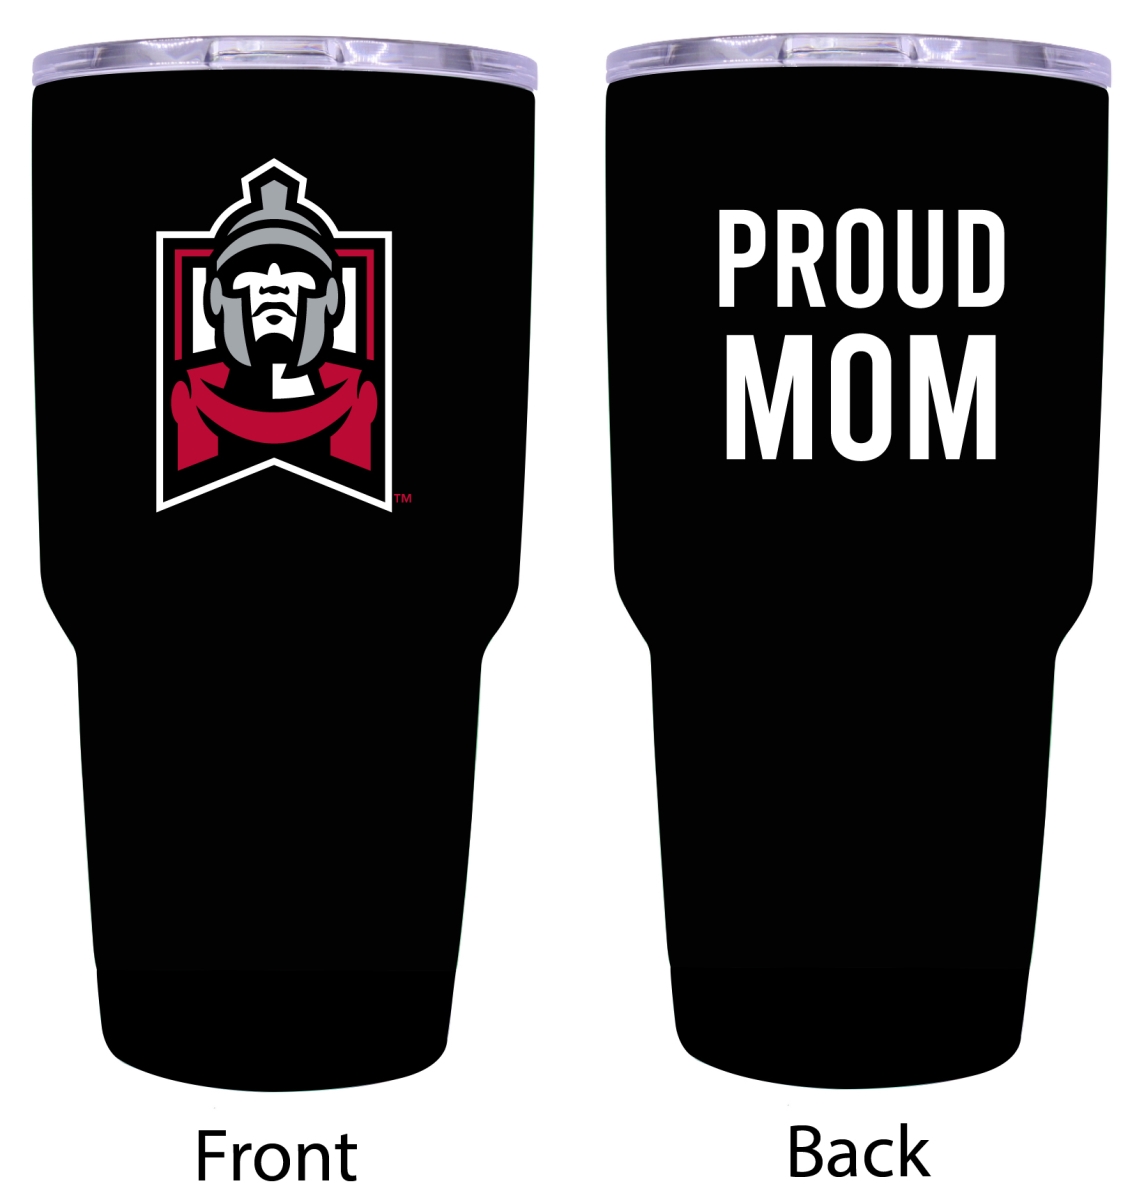 Picture of R & R Imports ITB-C-ESU20 MOM East Stroudsburg University Proud Mom 20 oz Insulated Stainless Steel Tumblers